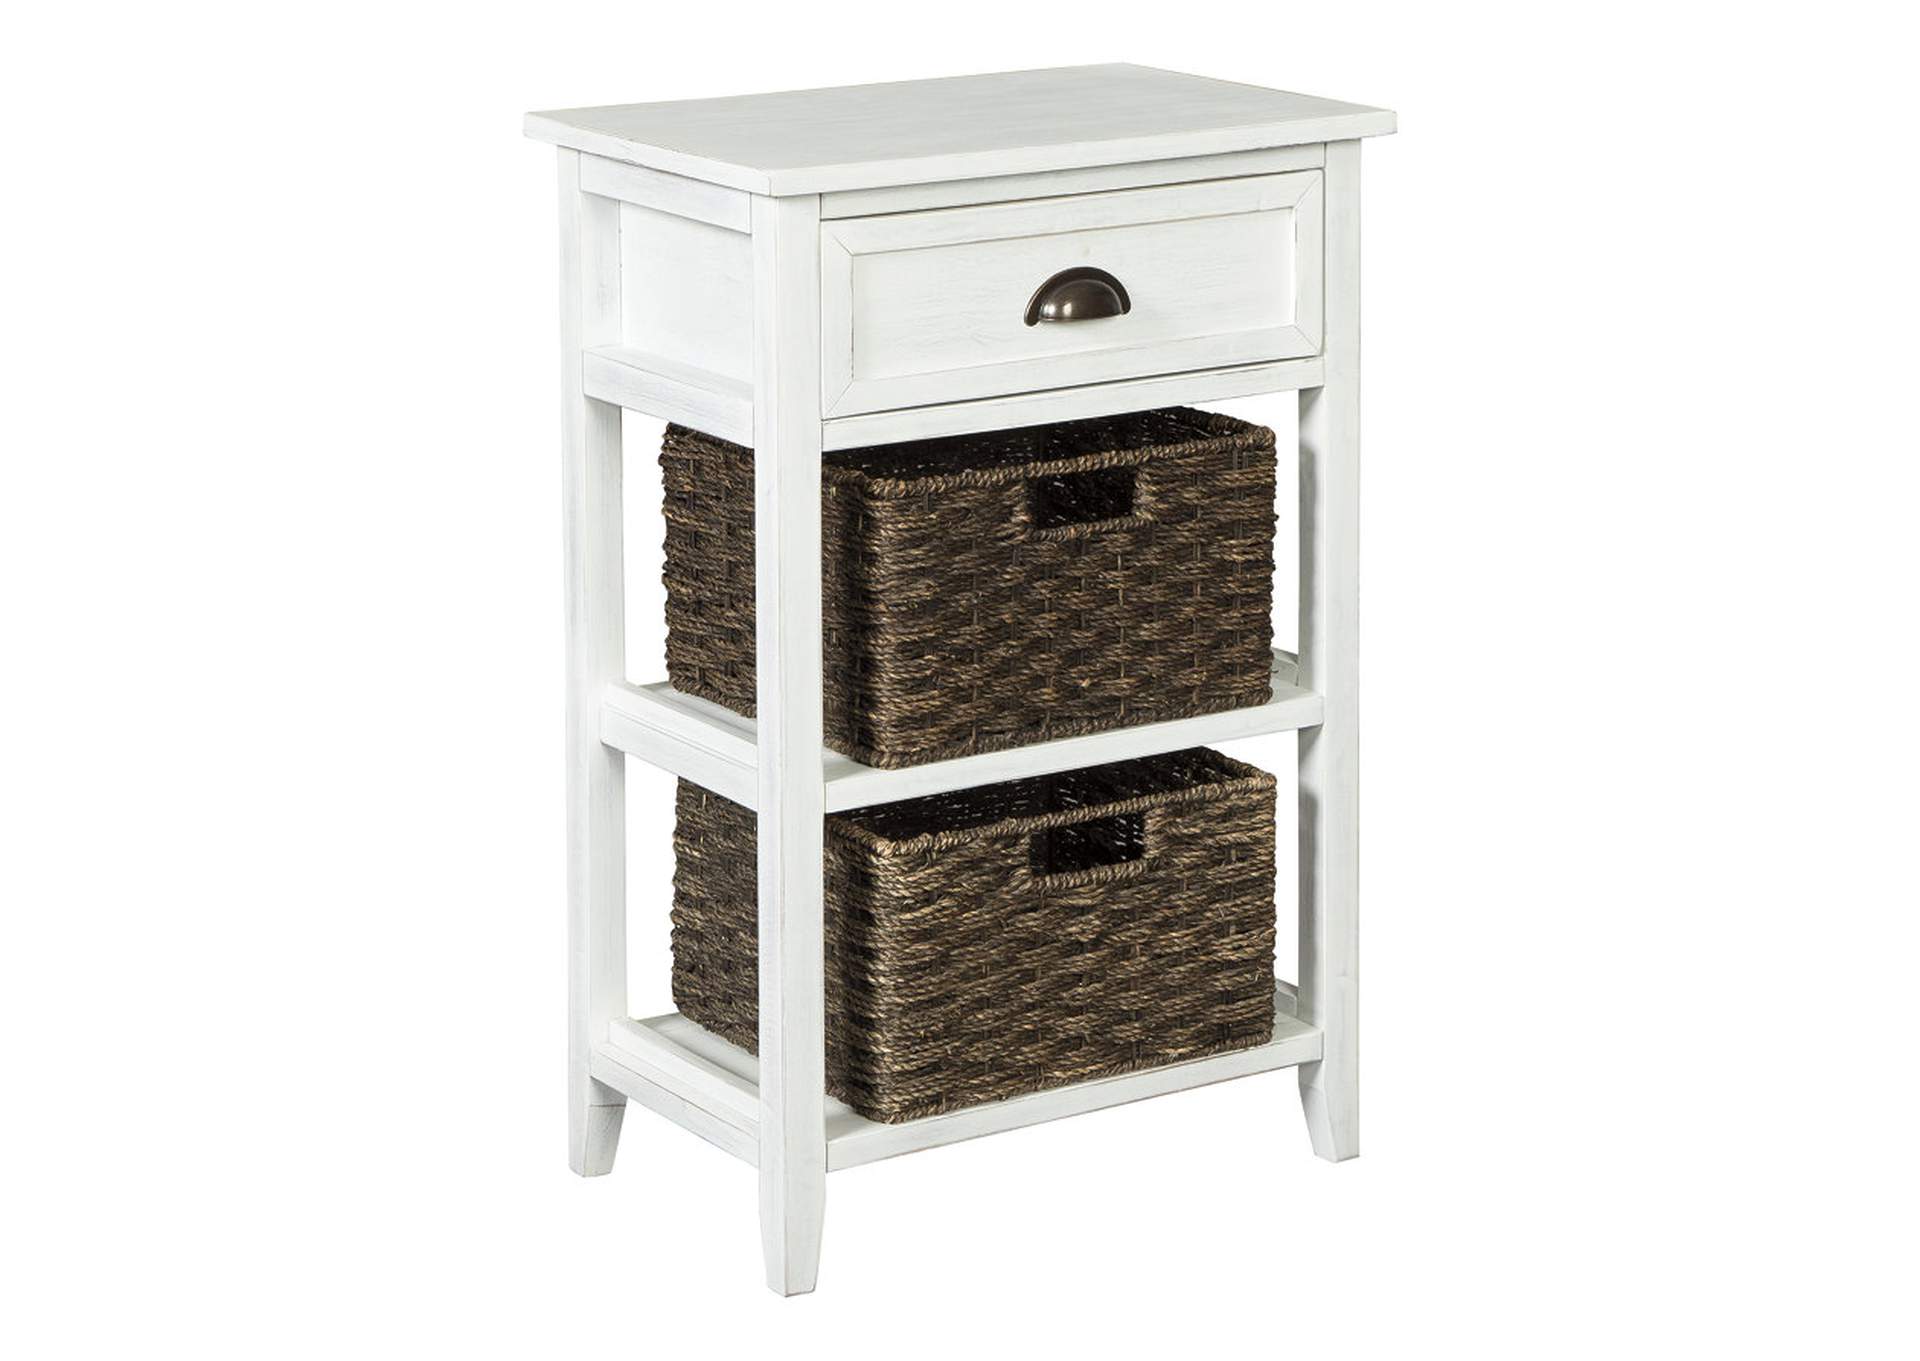 Oslember Accent Table,Signature Design By Ashley